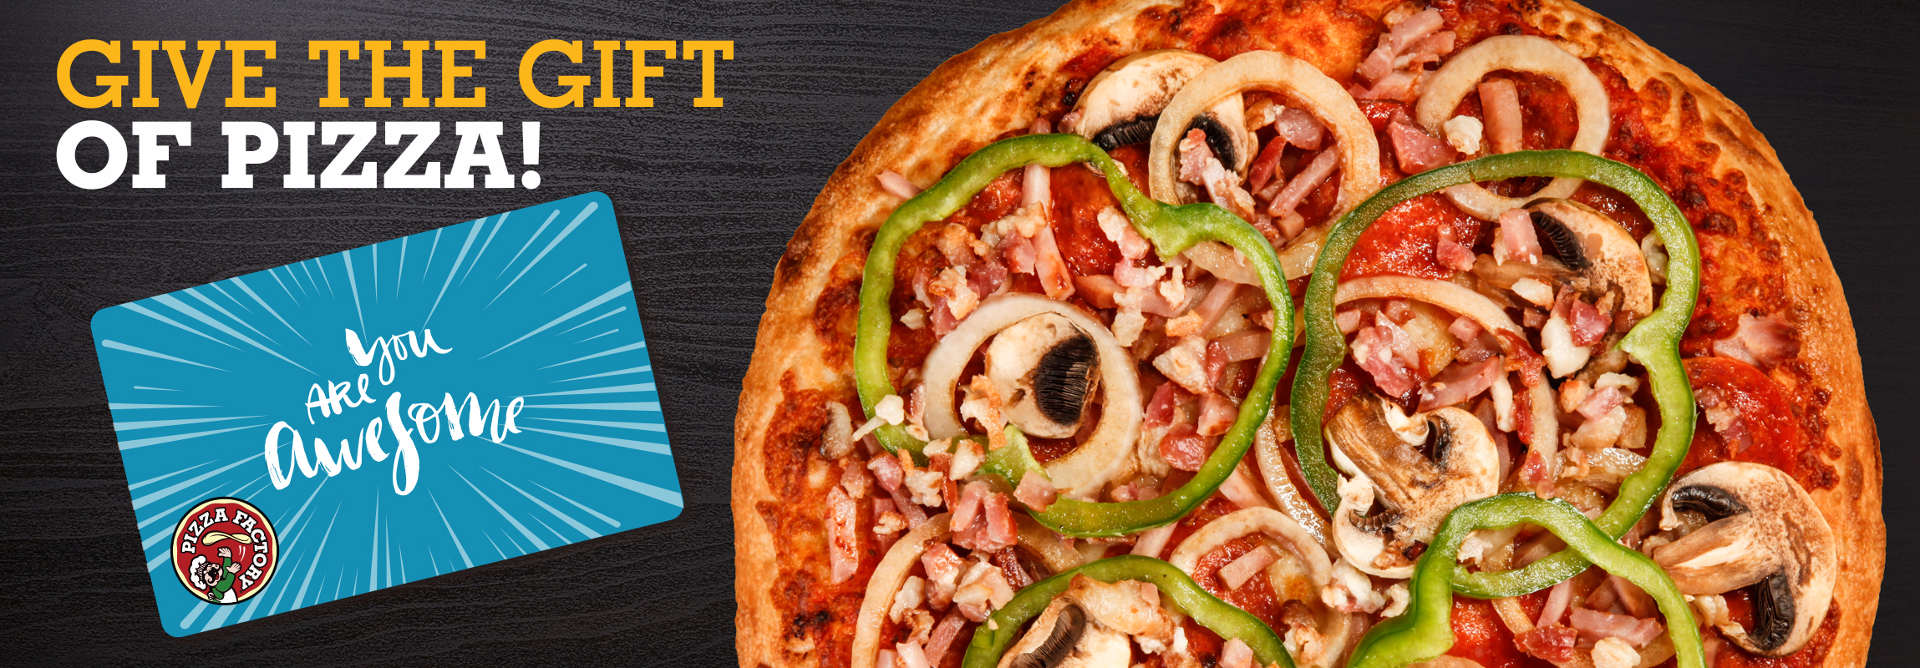 Give The Gift of Pizza! Large Veggie Pizza with a blue giftcard that says 'you are awesome'